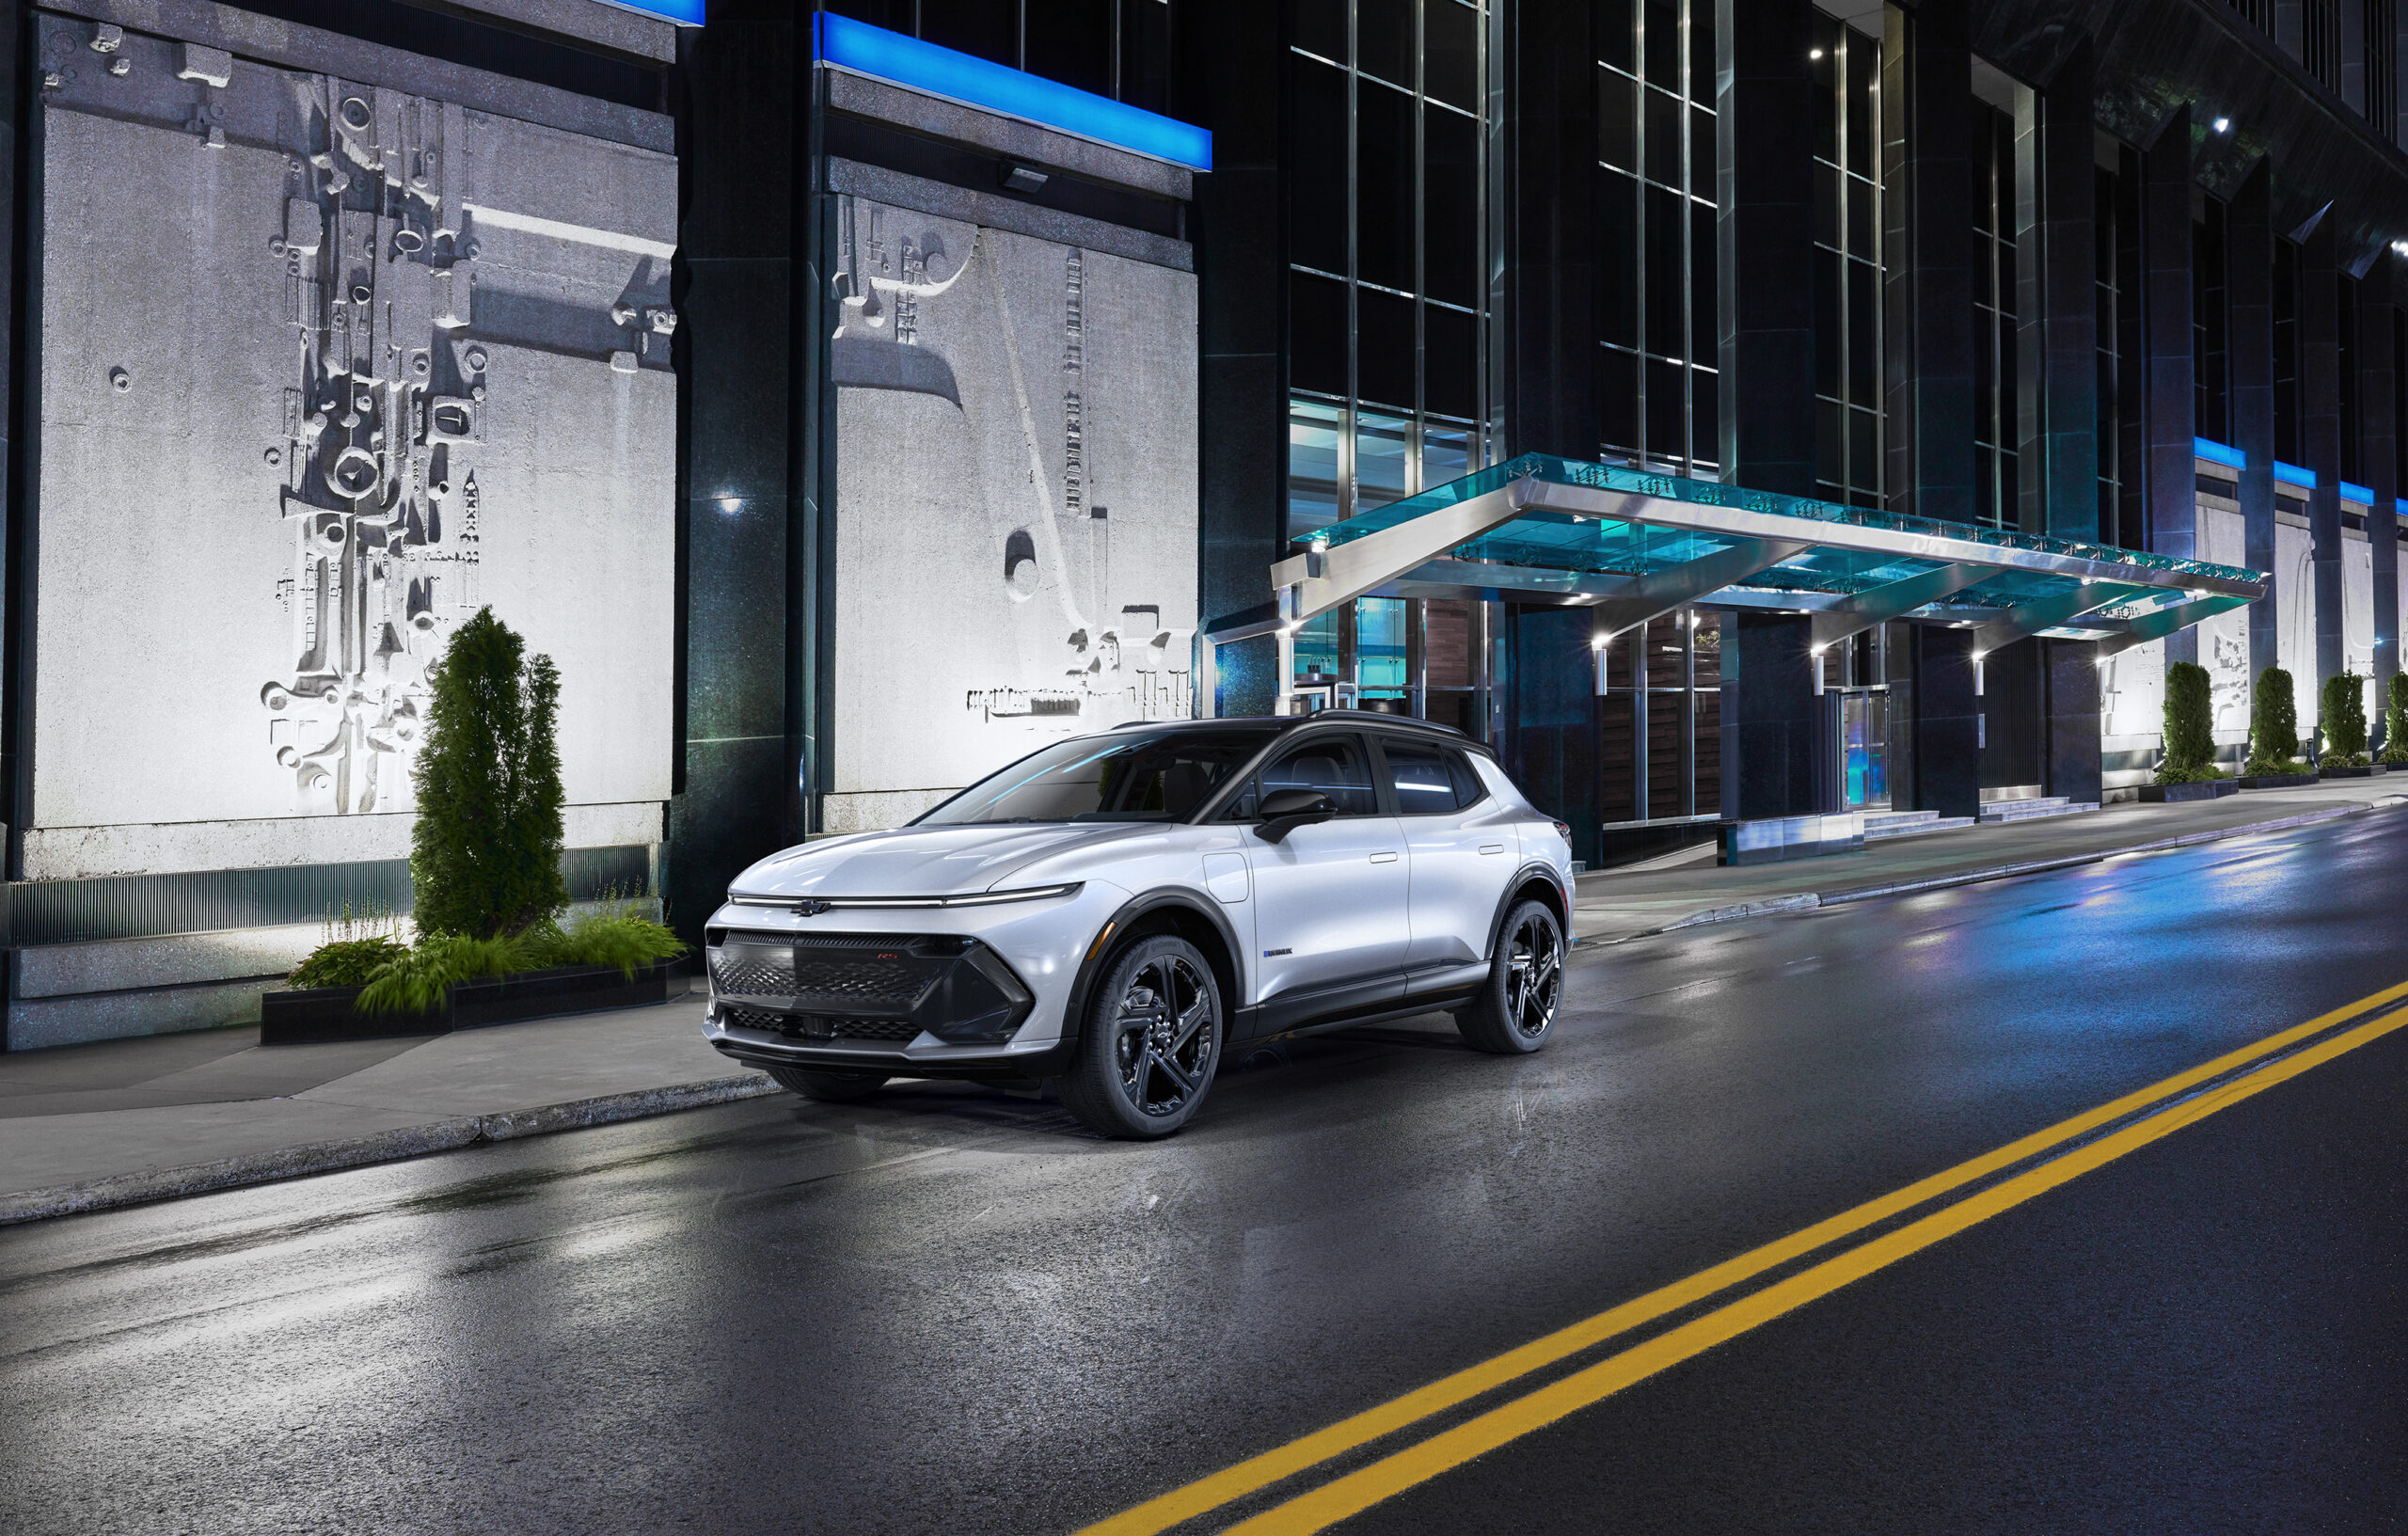 Take a look at Honda, Jeep, and Chevy’s new electric lineup